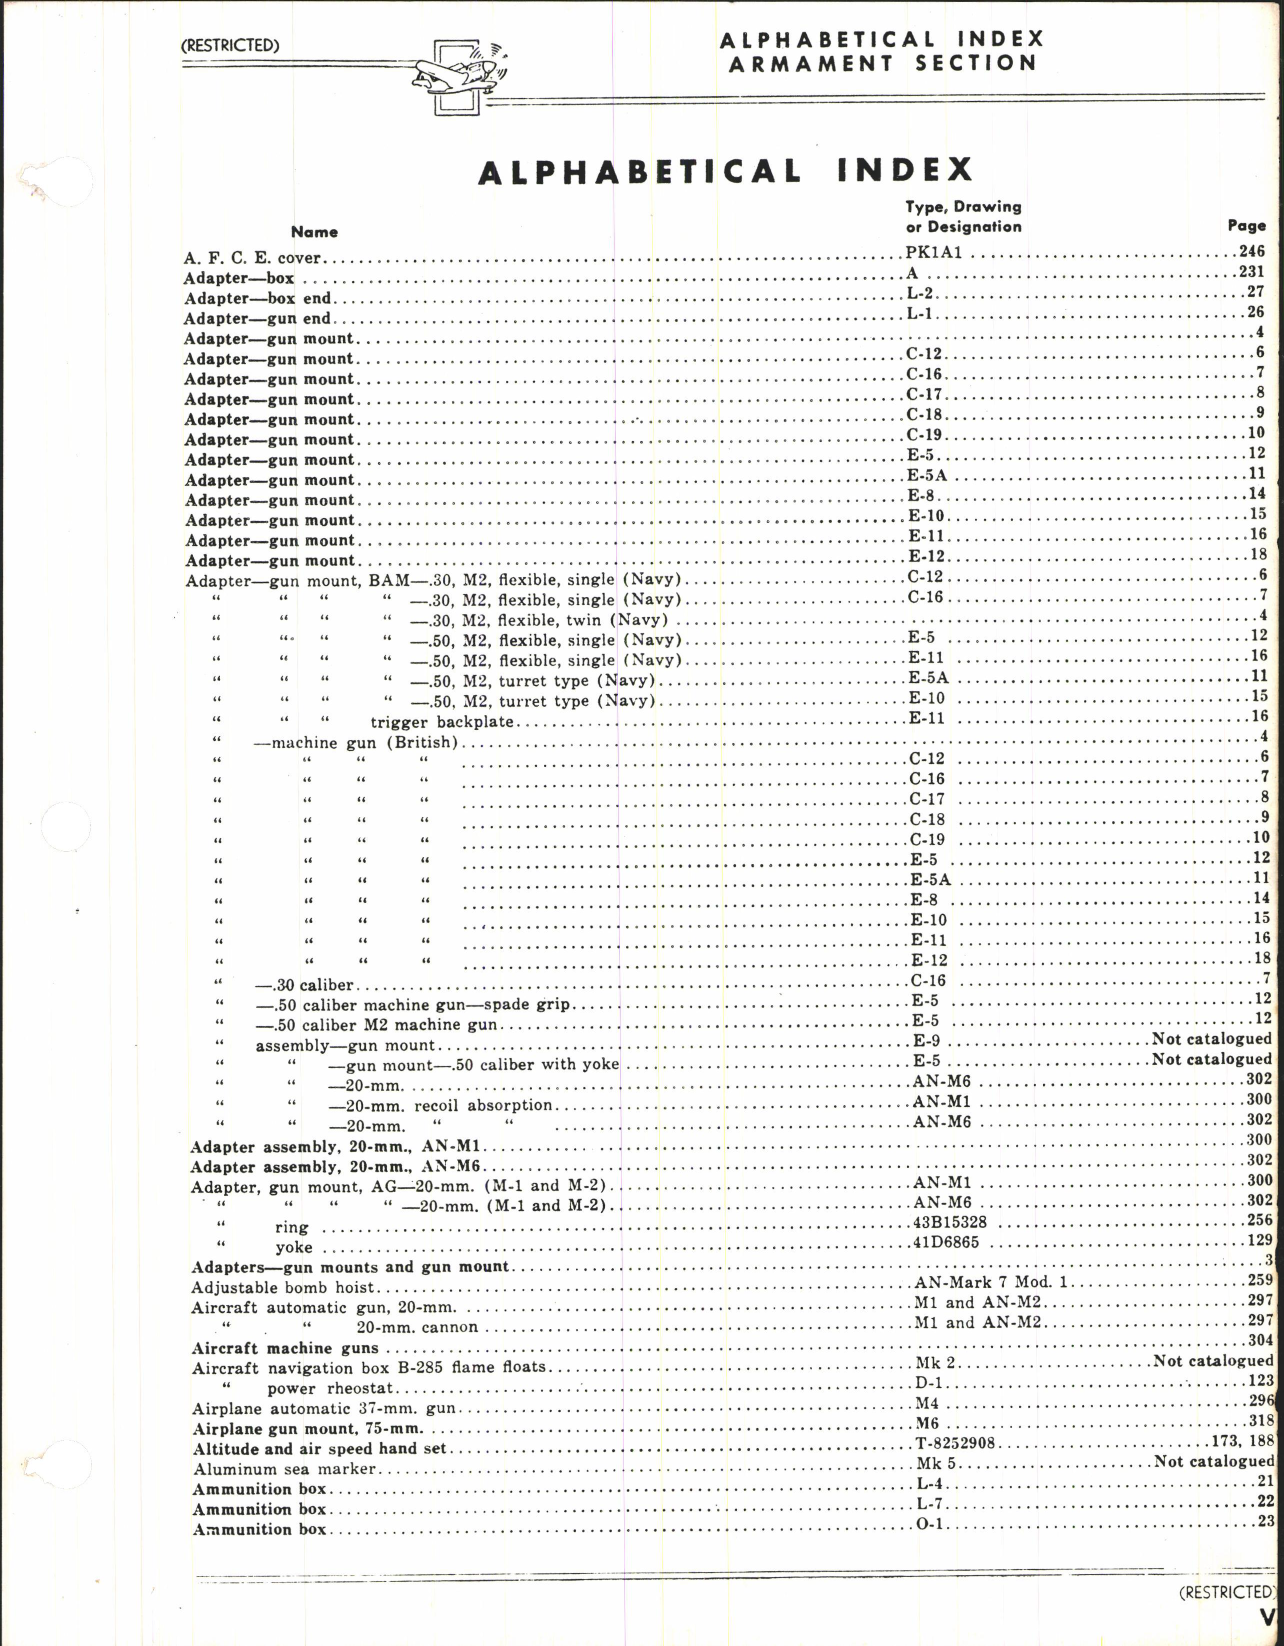 Sample page 7 from AirCorps Library document: Army-Navy Index of Aeronautical Equipment - Armament